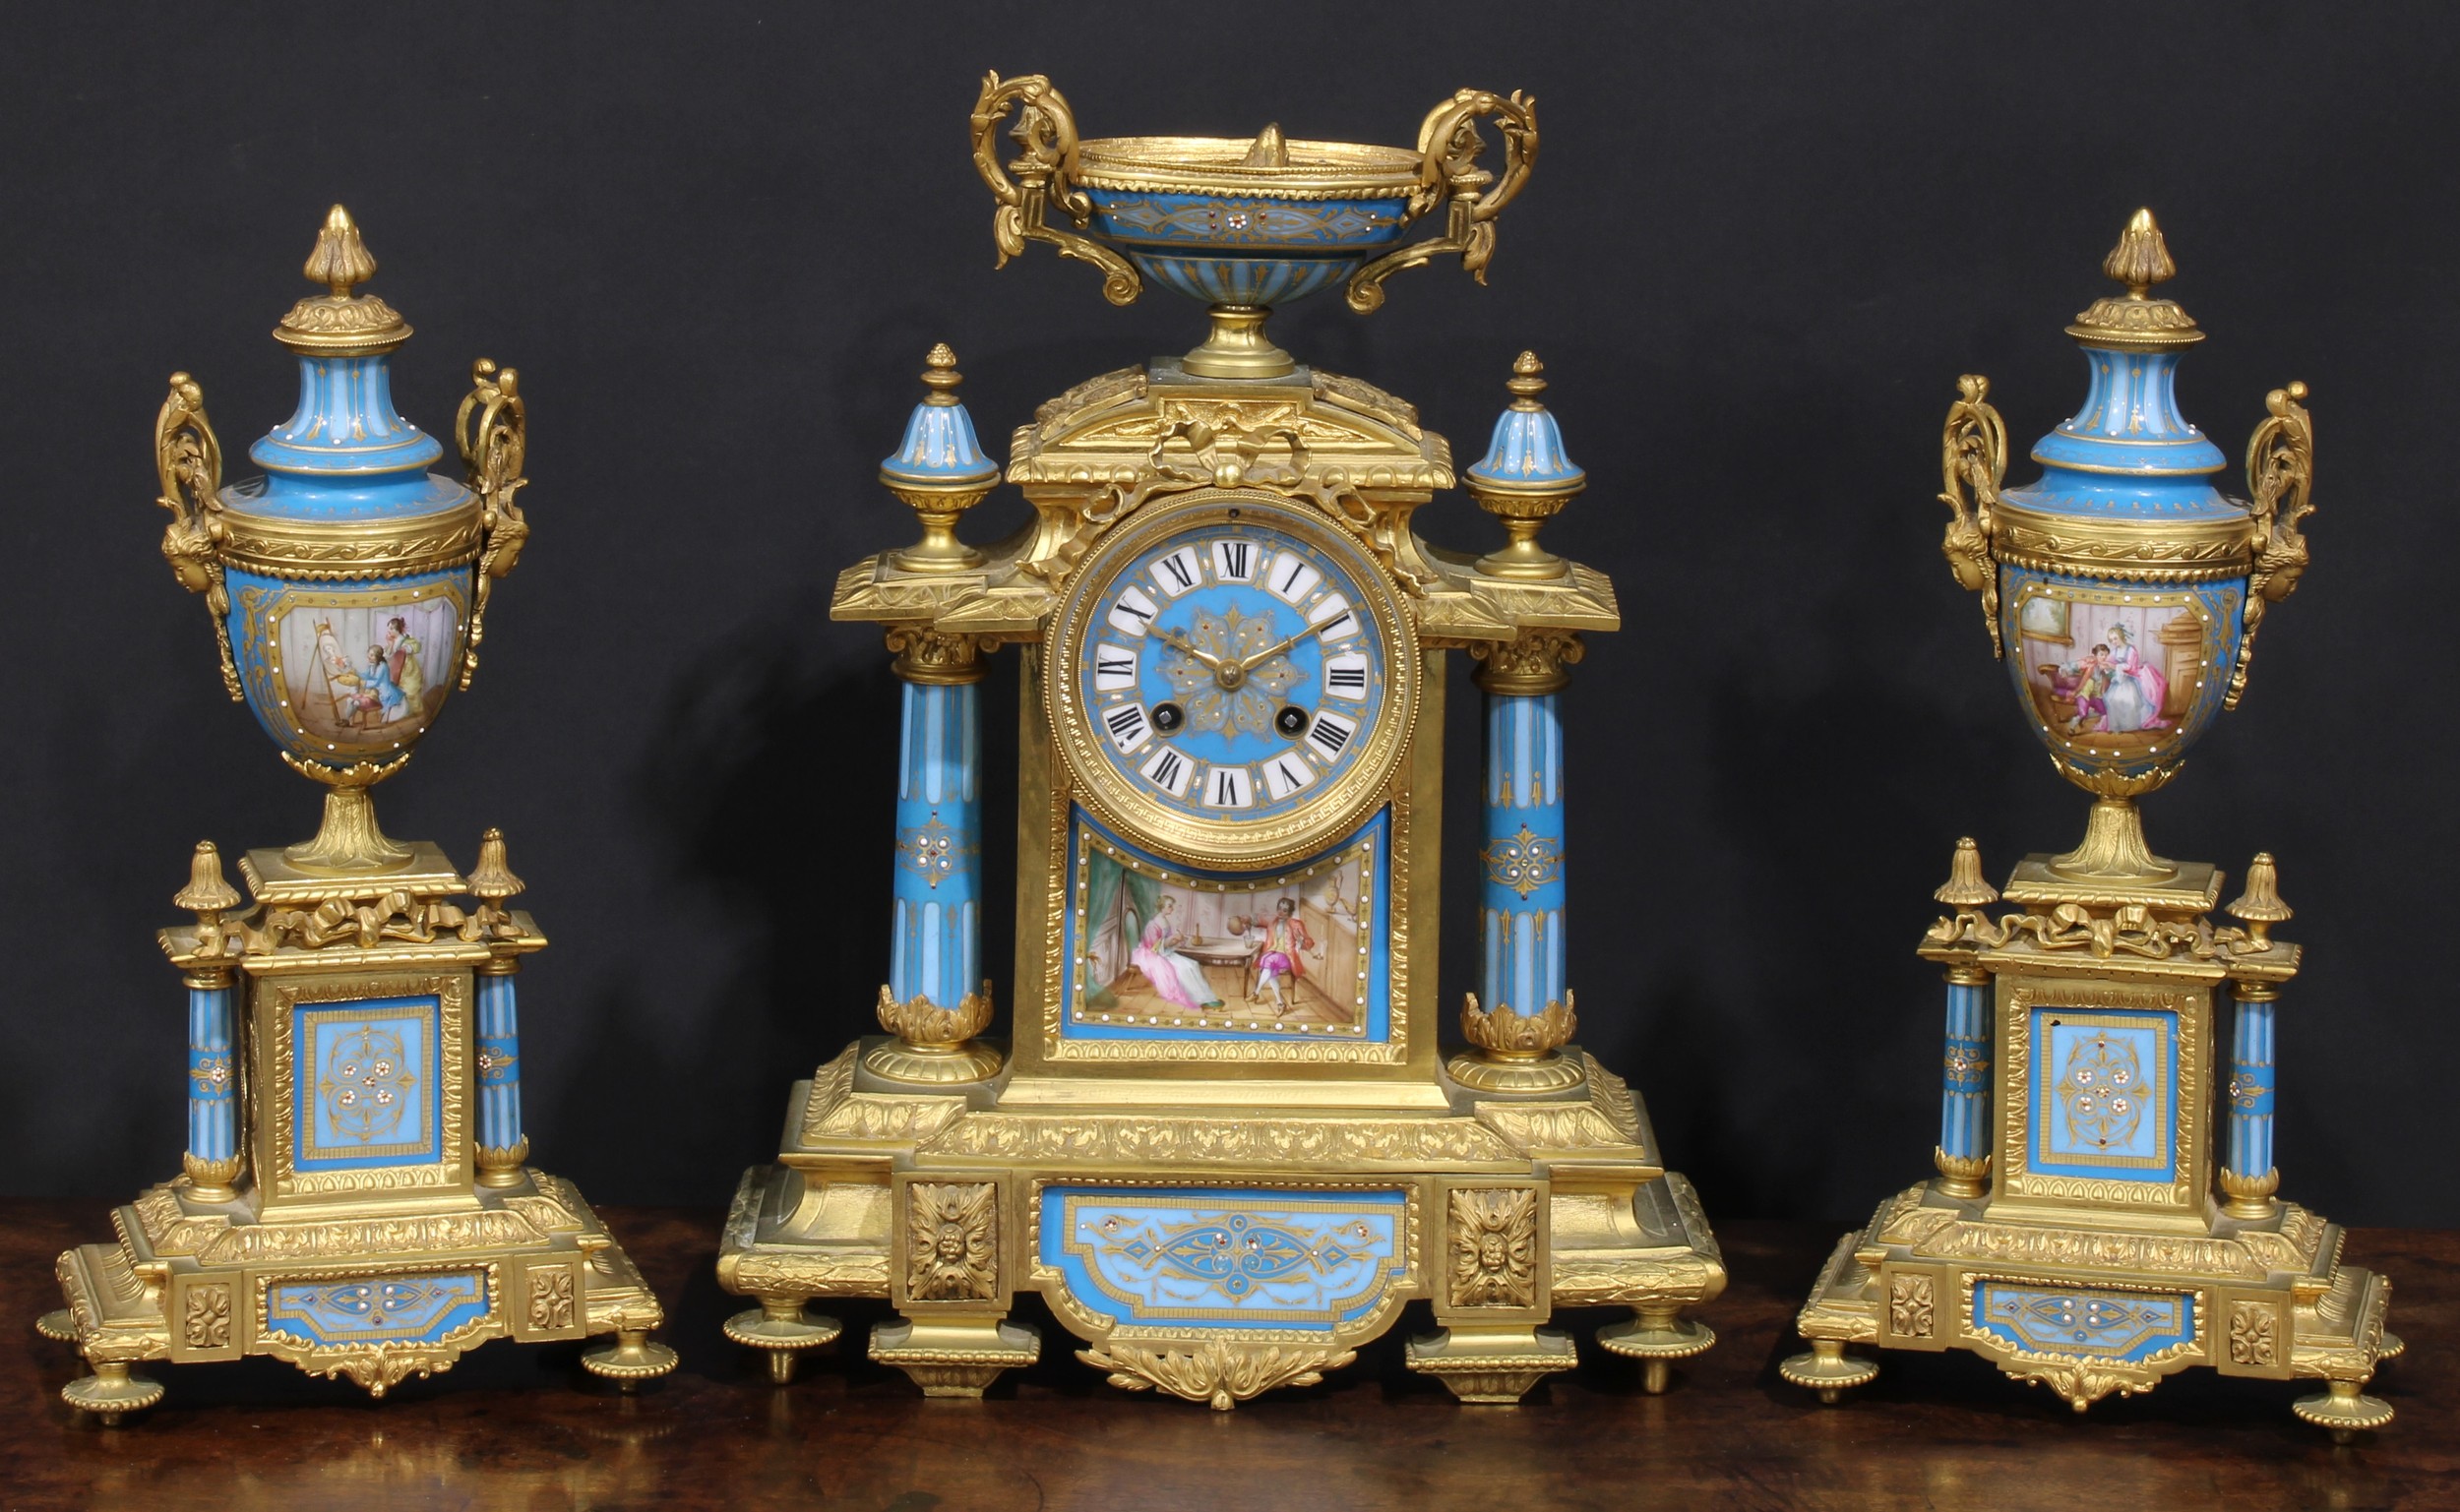 A 19th century French ormolu and porcelain clock garniature, in the Louis XVI Revival taste, 9cm